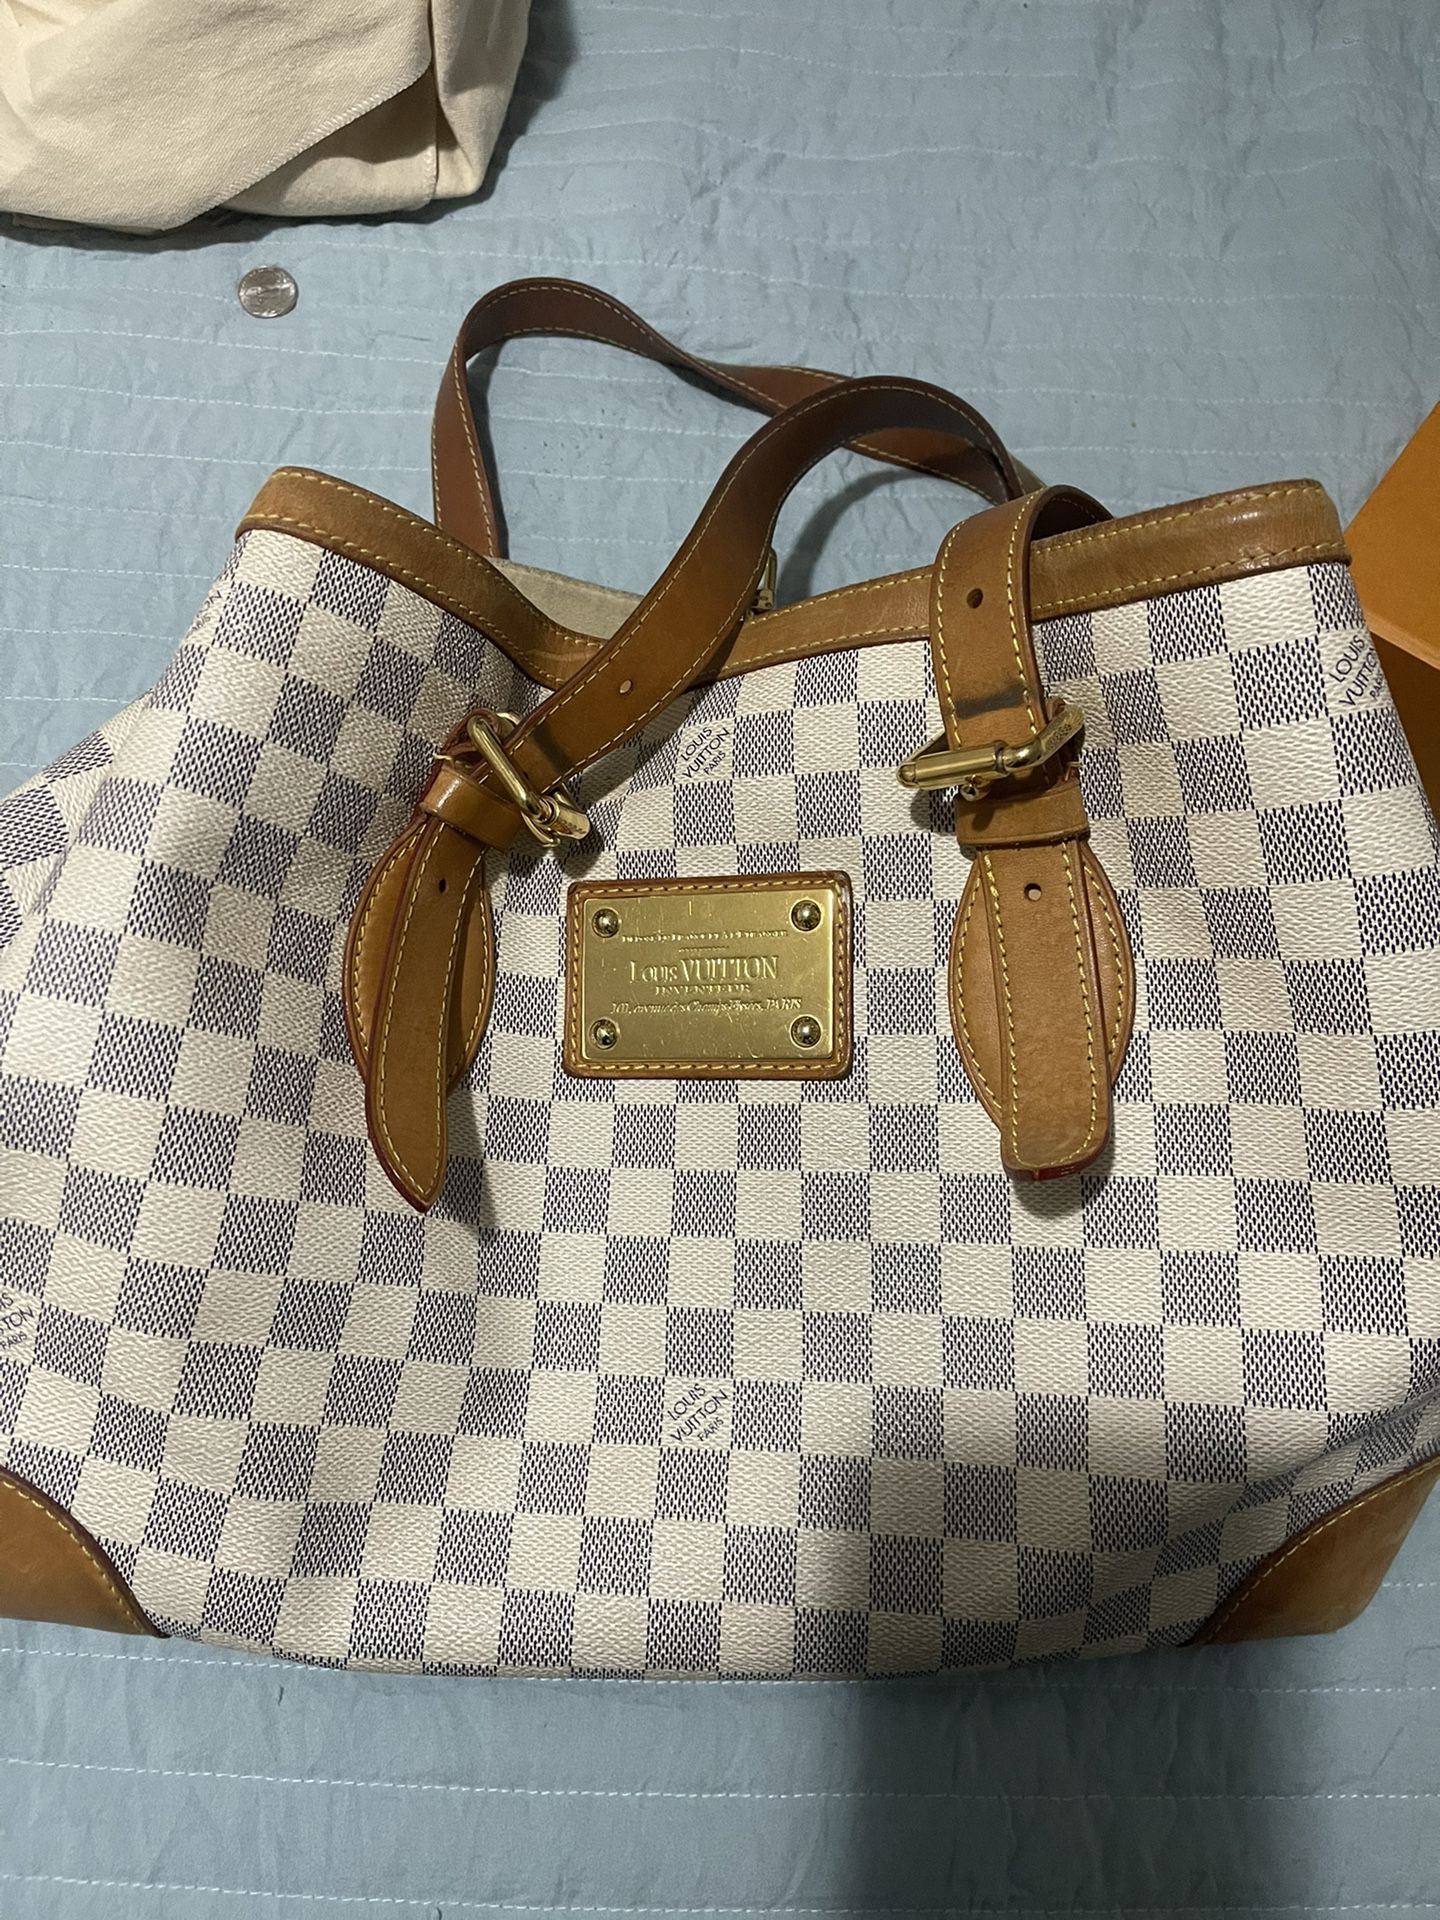 Authentic Louis Vuitton Hampstead Bag for Sale in Miami, FL - OfferUp